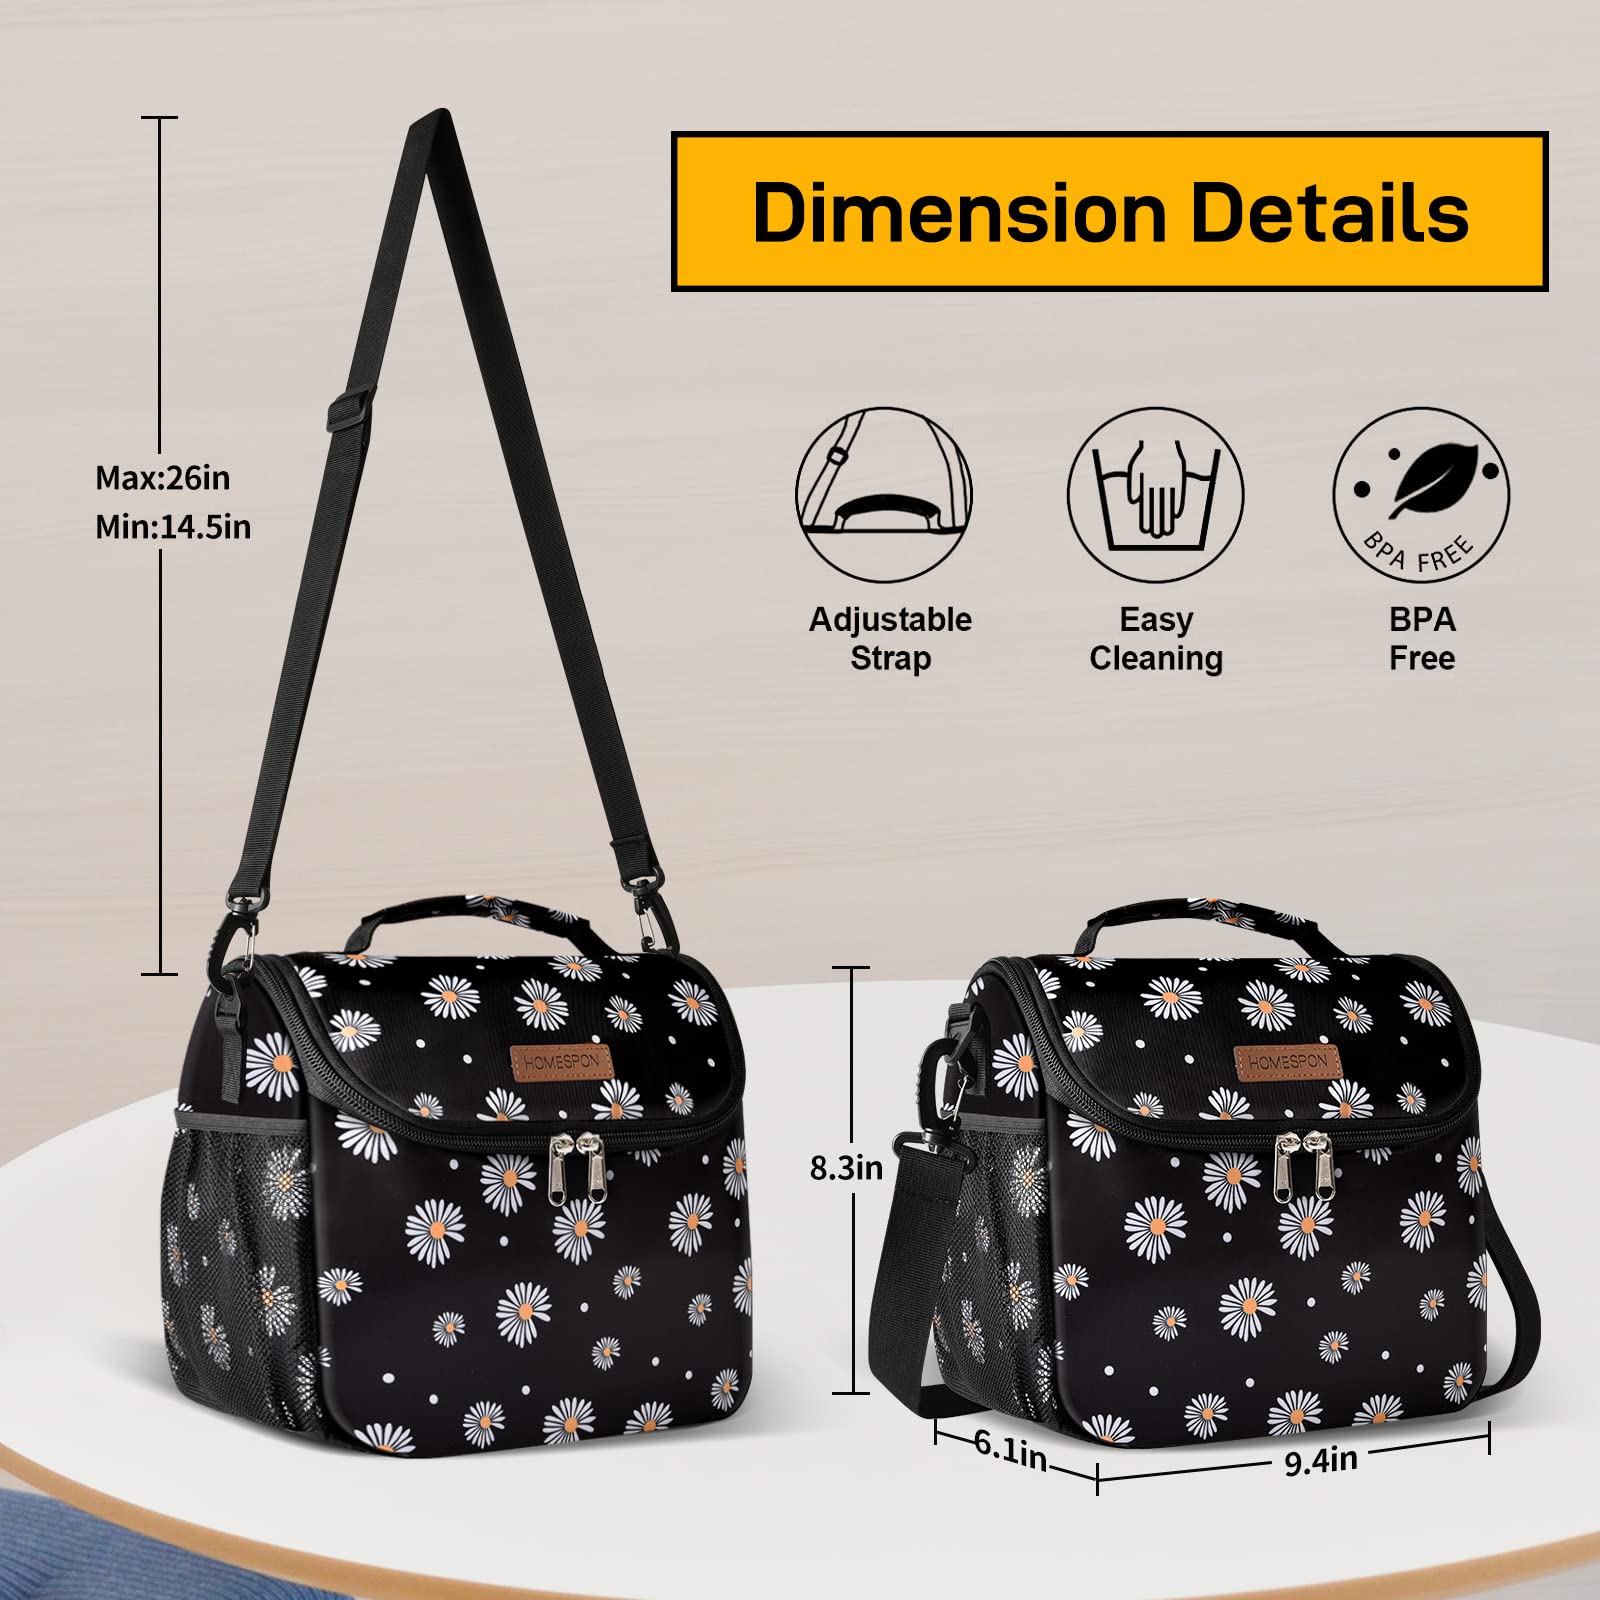 Buringer HOMESPON Insulated Lunch Bag for Women Reusable Lunch Box Cute Cooler Tote with Adjustable Shoulder Strap for Work Picnic or Travel